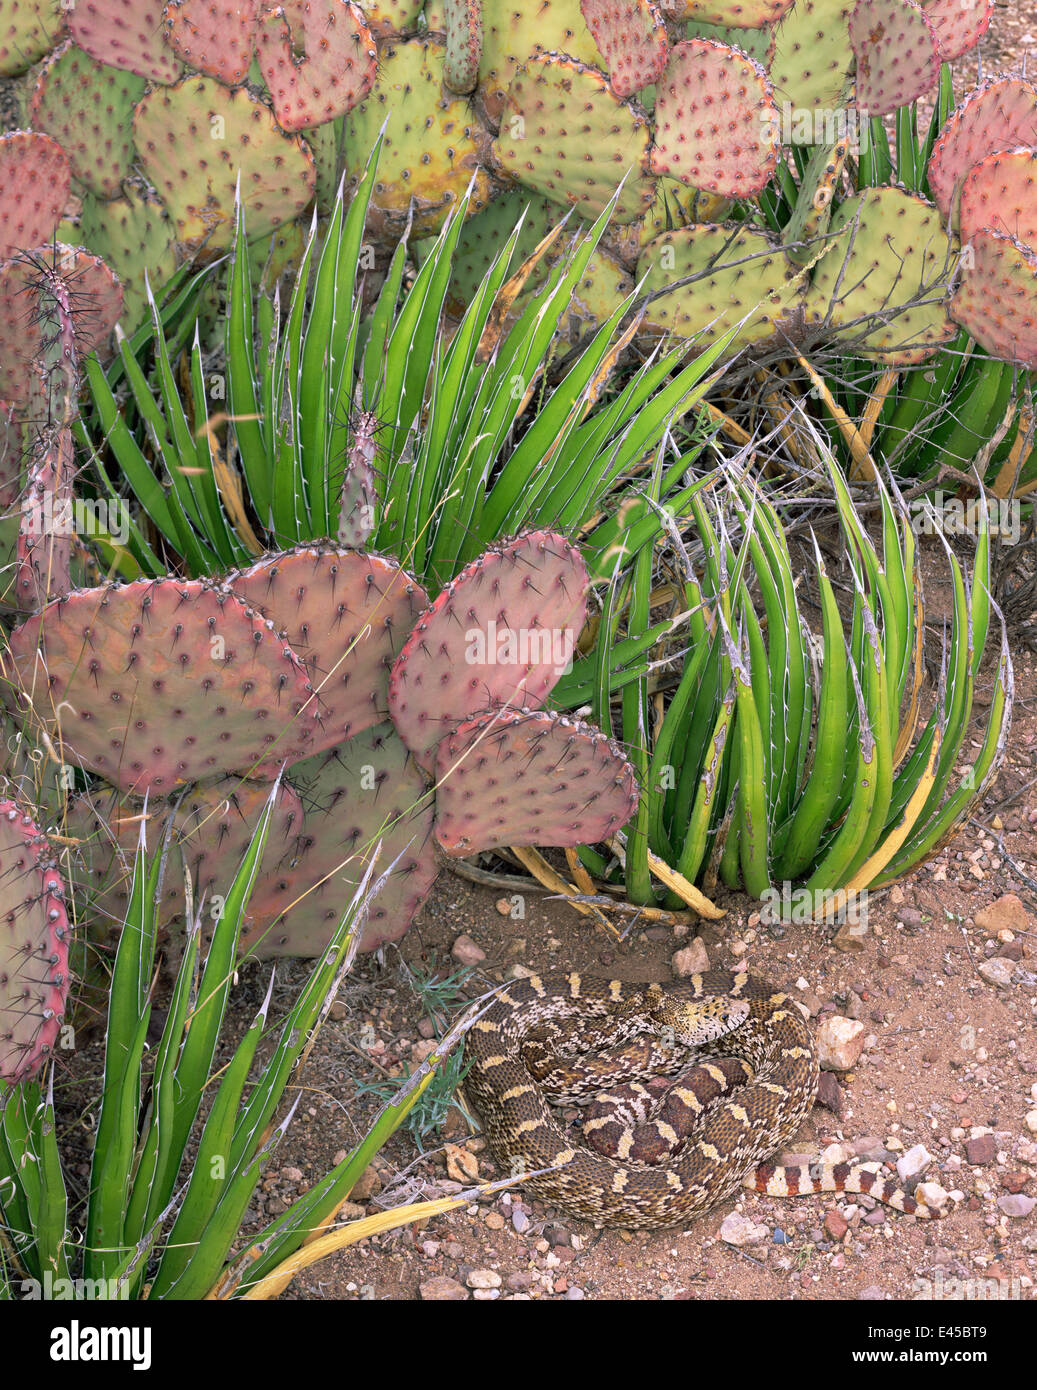 Gopher snake (Pituophis sp) amongst Lechuguilla (Agave lechuguilla) and prickly pear cacti (Opuntia macrocentra), Maderas del Carmen Natural Reserve, Mexico Stock Photo